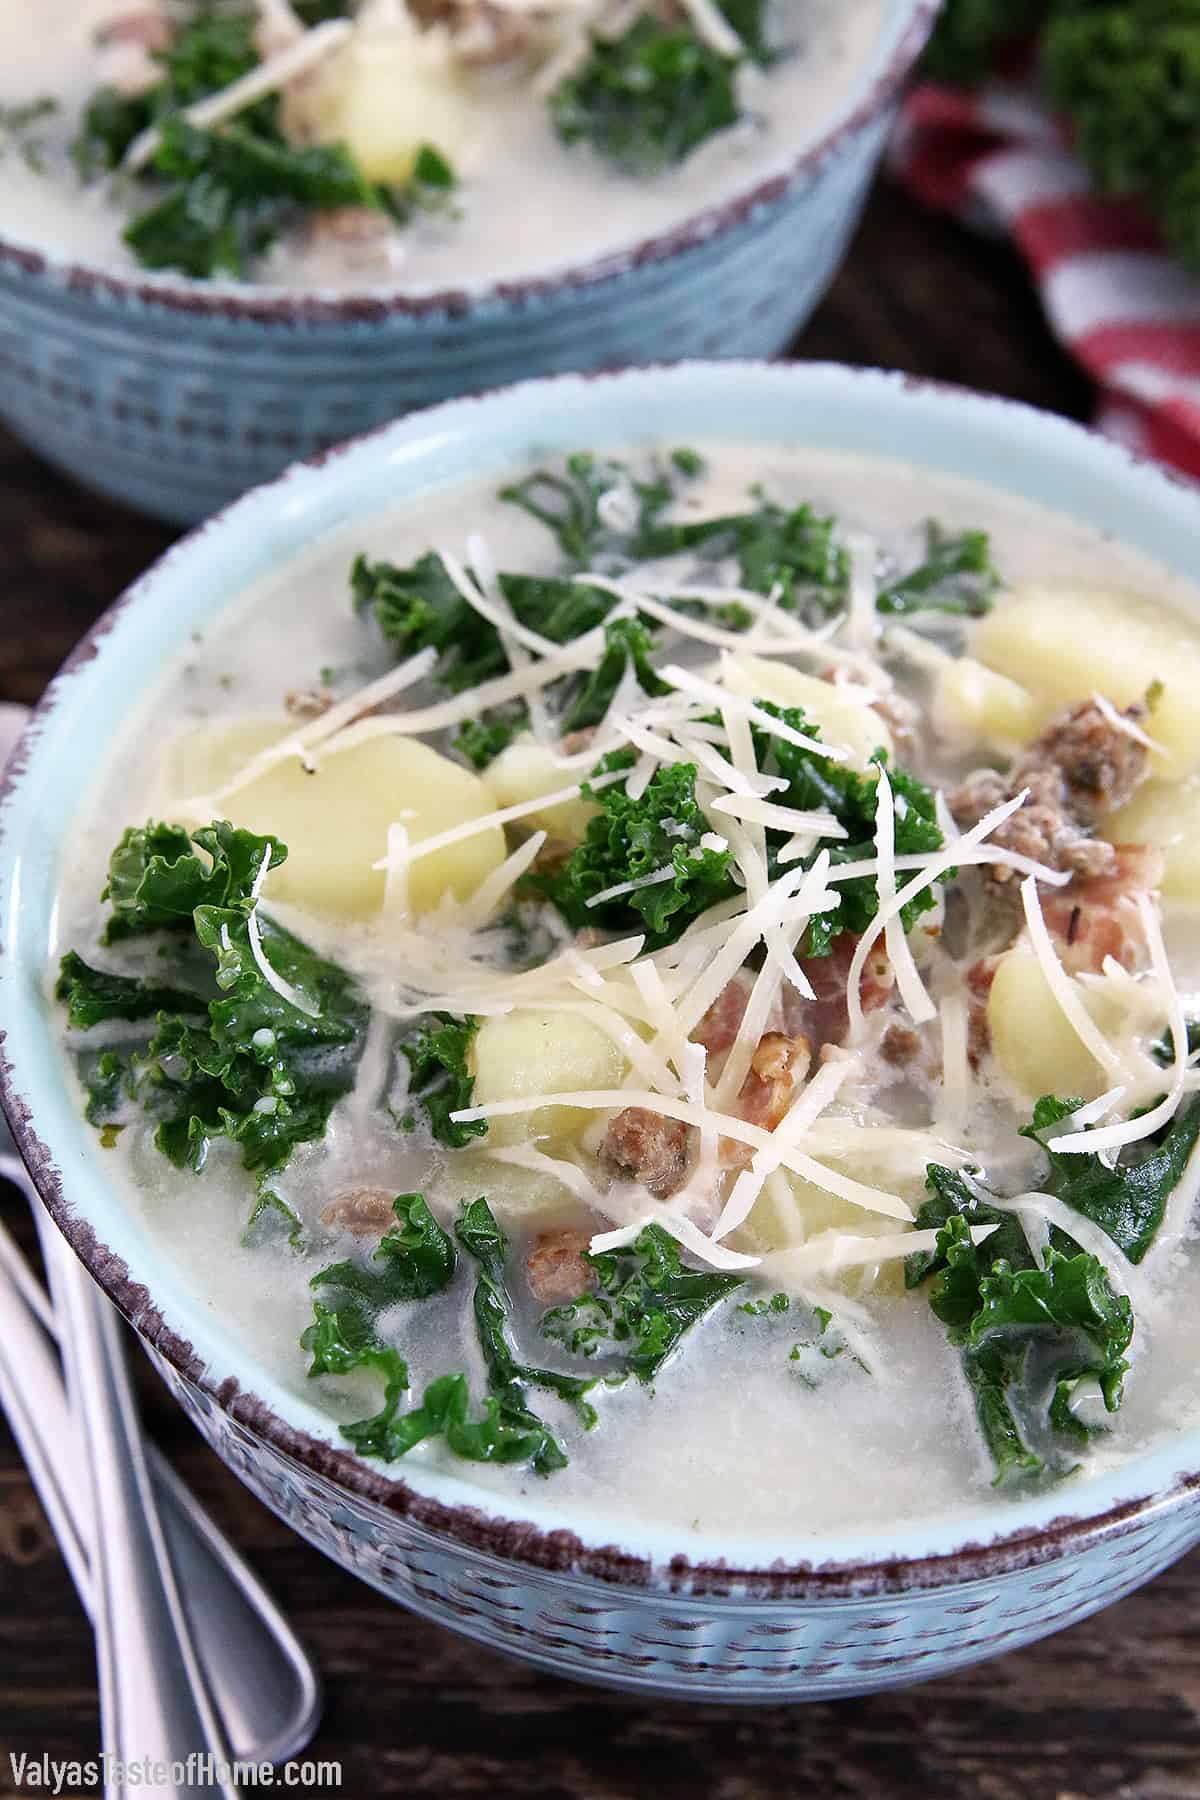 Everyone's homemade recipes for Zuppa are pretty similar, but this recipe is The Best Zuppa Toscana Soup with Homemade Sausage - according to my picky little eaters.